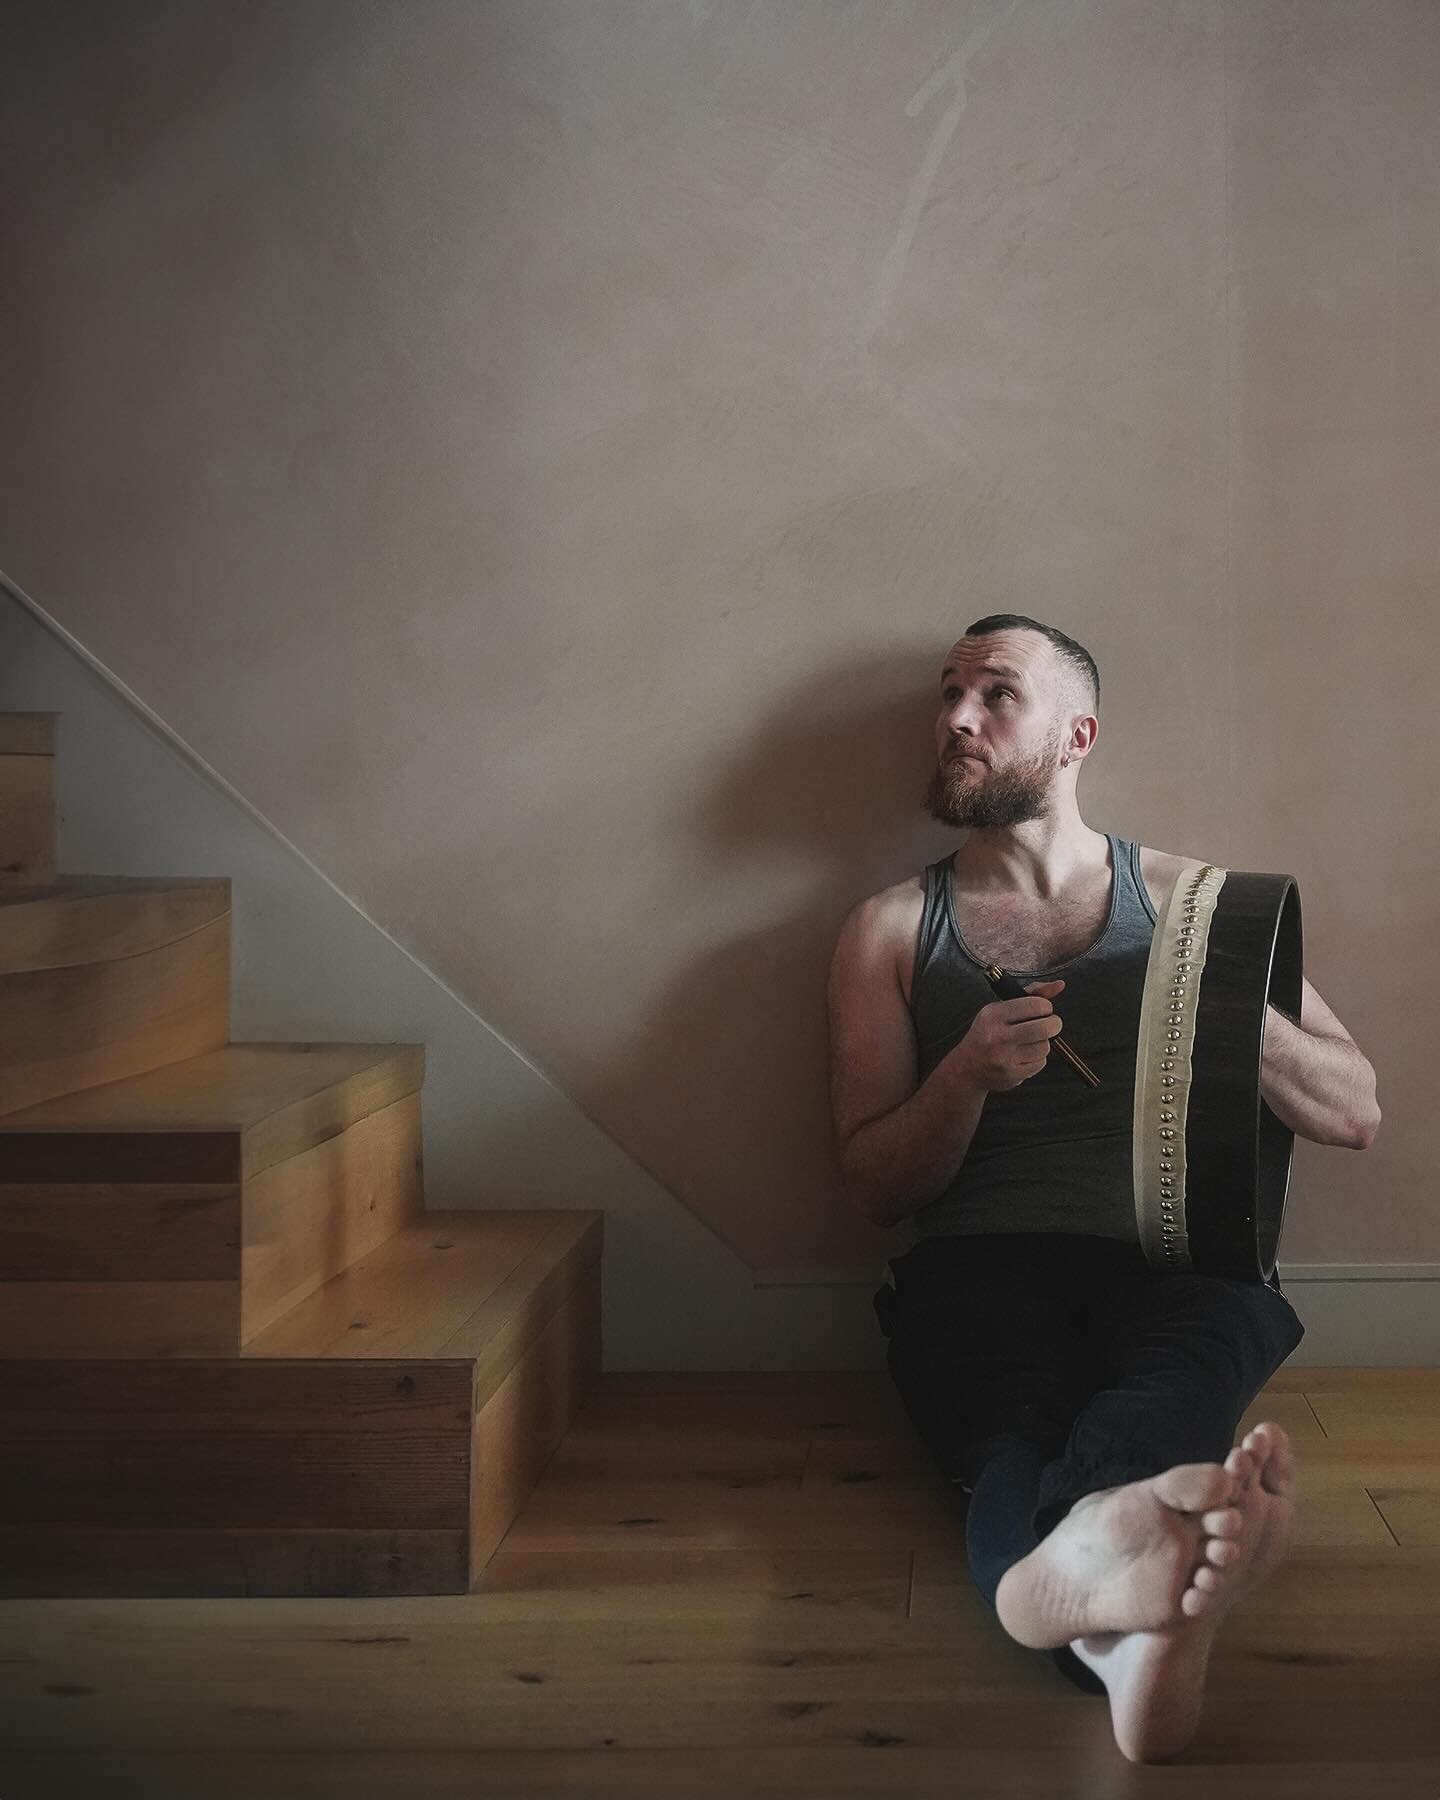 Fell down the stairs and landed here with my #bodhr&aacute;n 

#portrait #leica #photography #musician